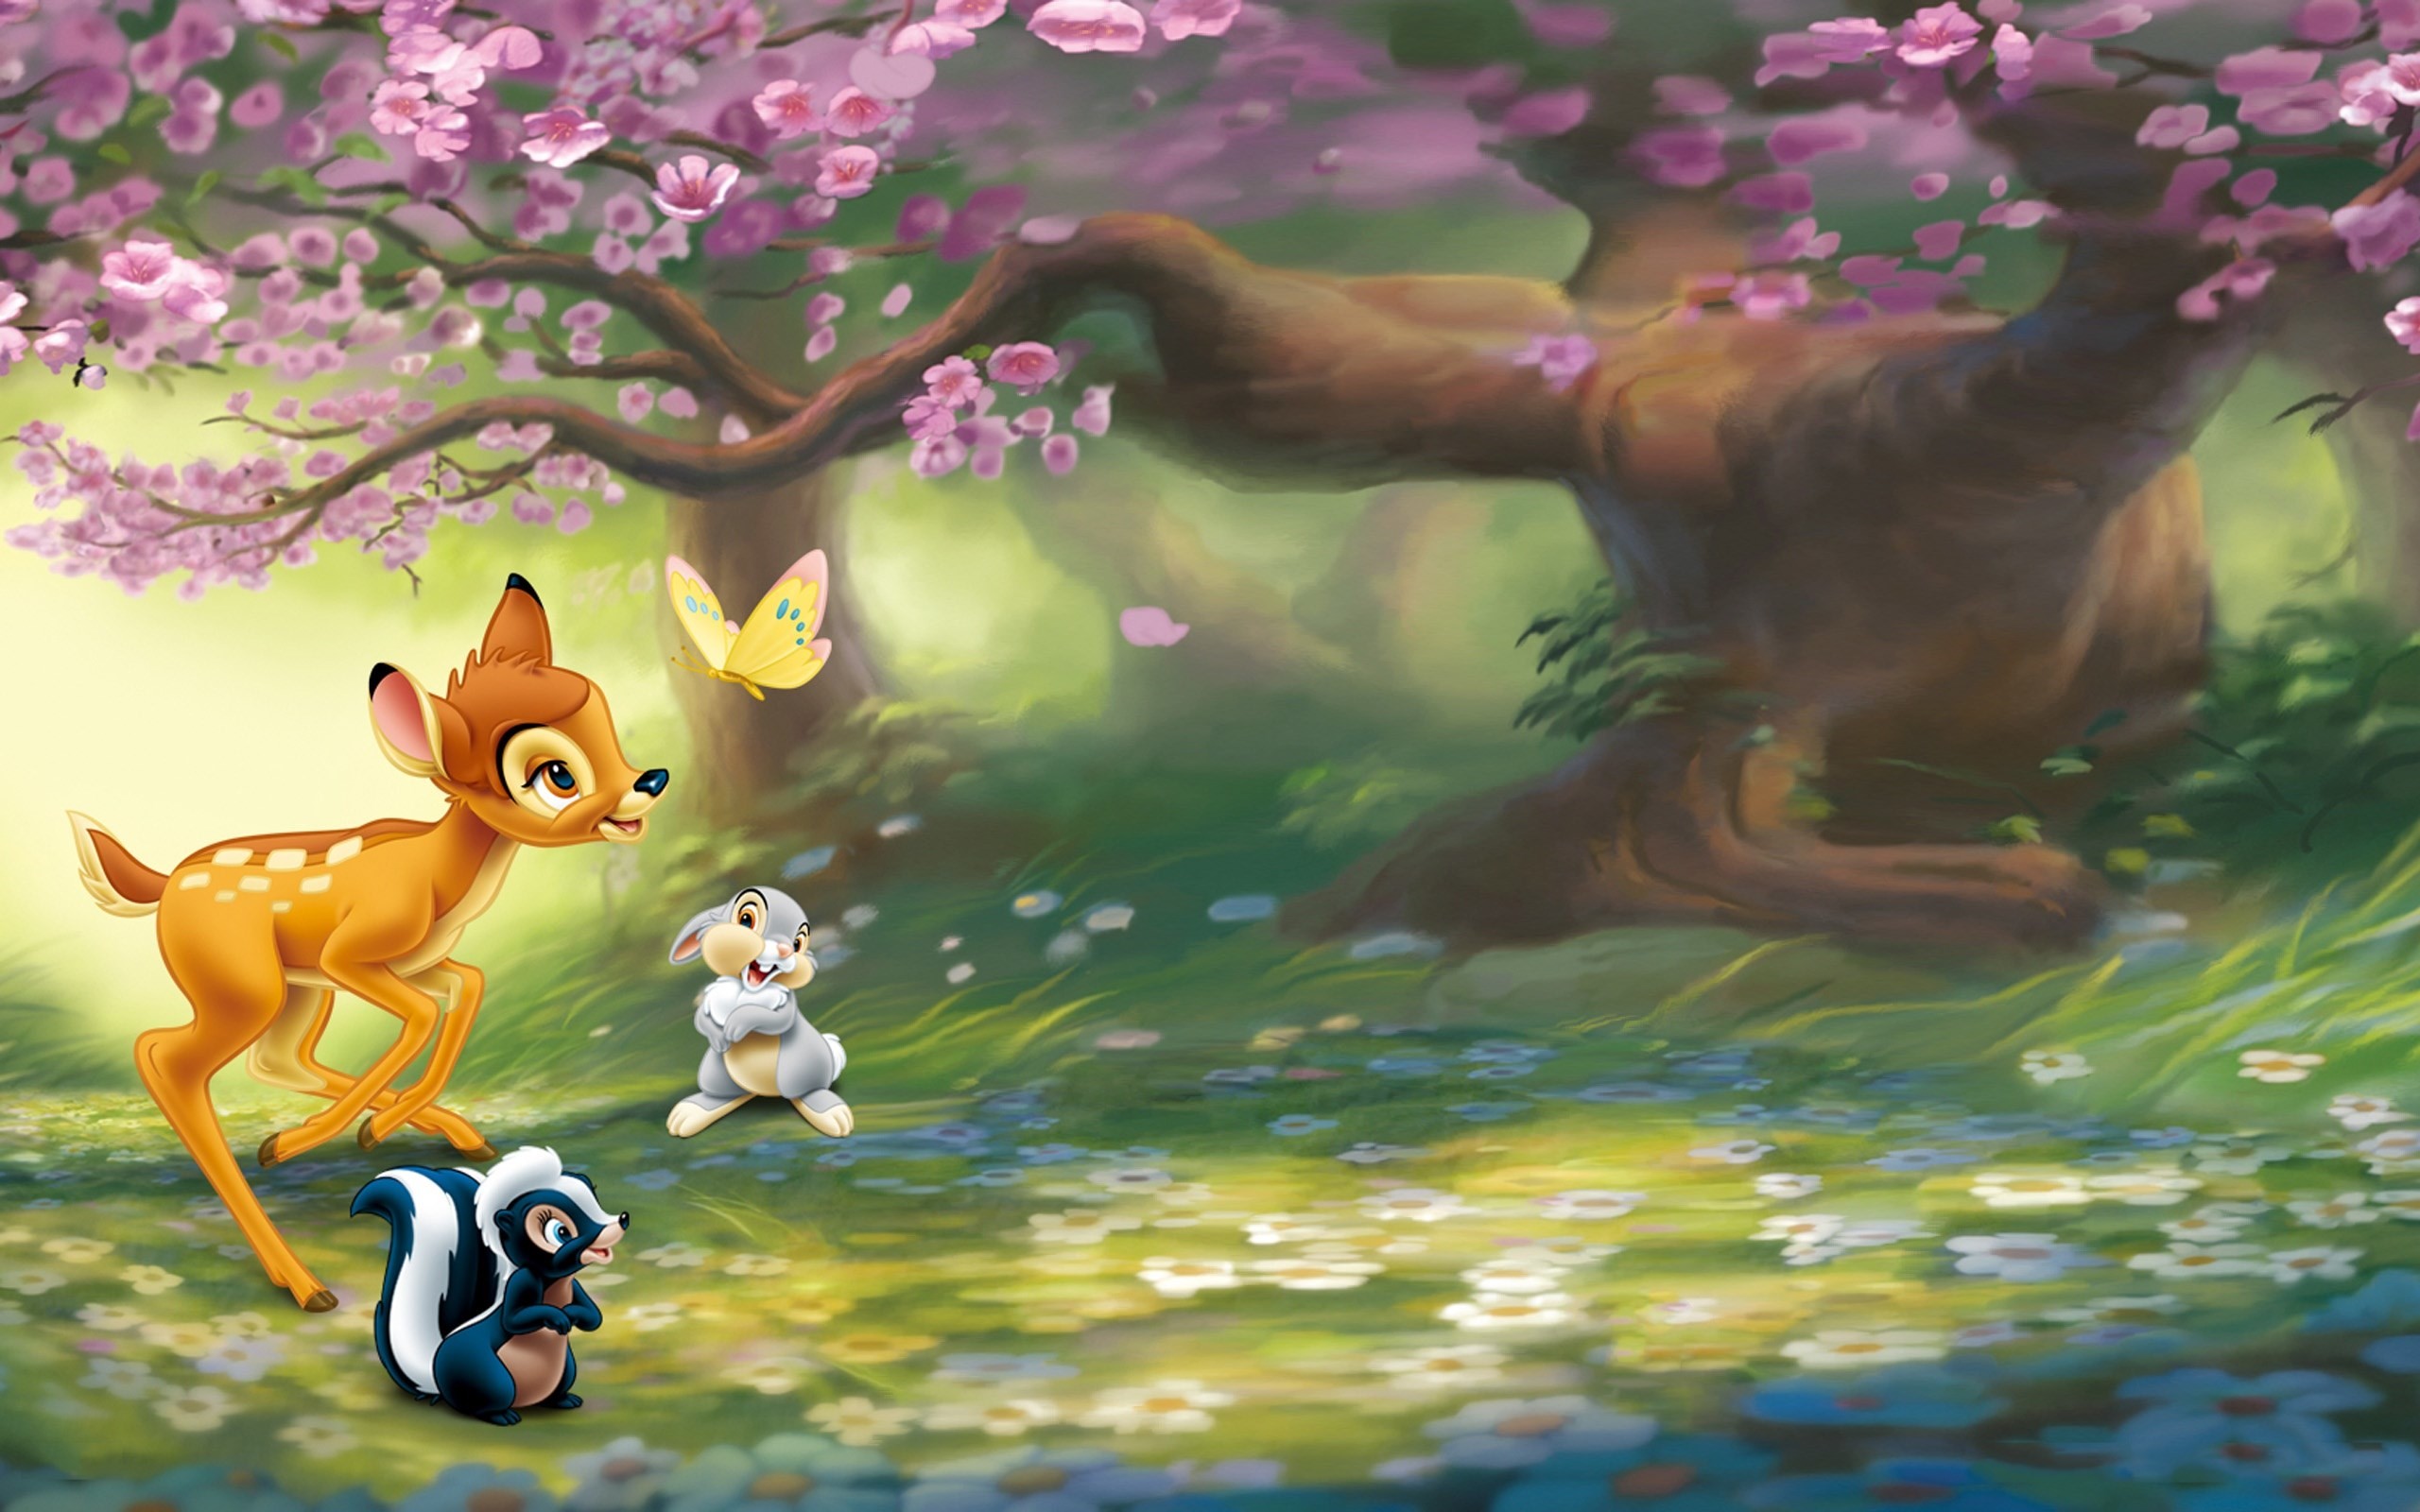 2560x1600 This Disney wallpaper is based on the 1942 Disney movie, Bambi. Here you  see Bambi and his friends, Thumper and Flower, enjoying the beautiful  scenery of ...